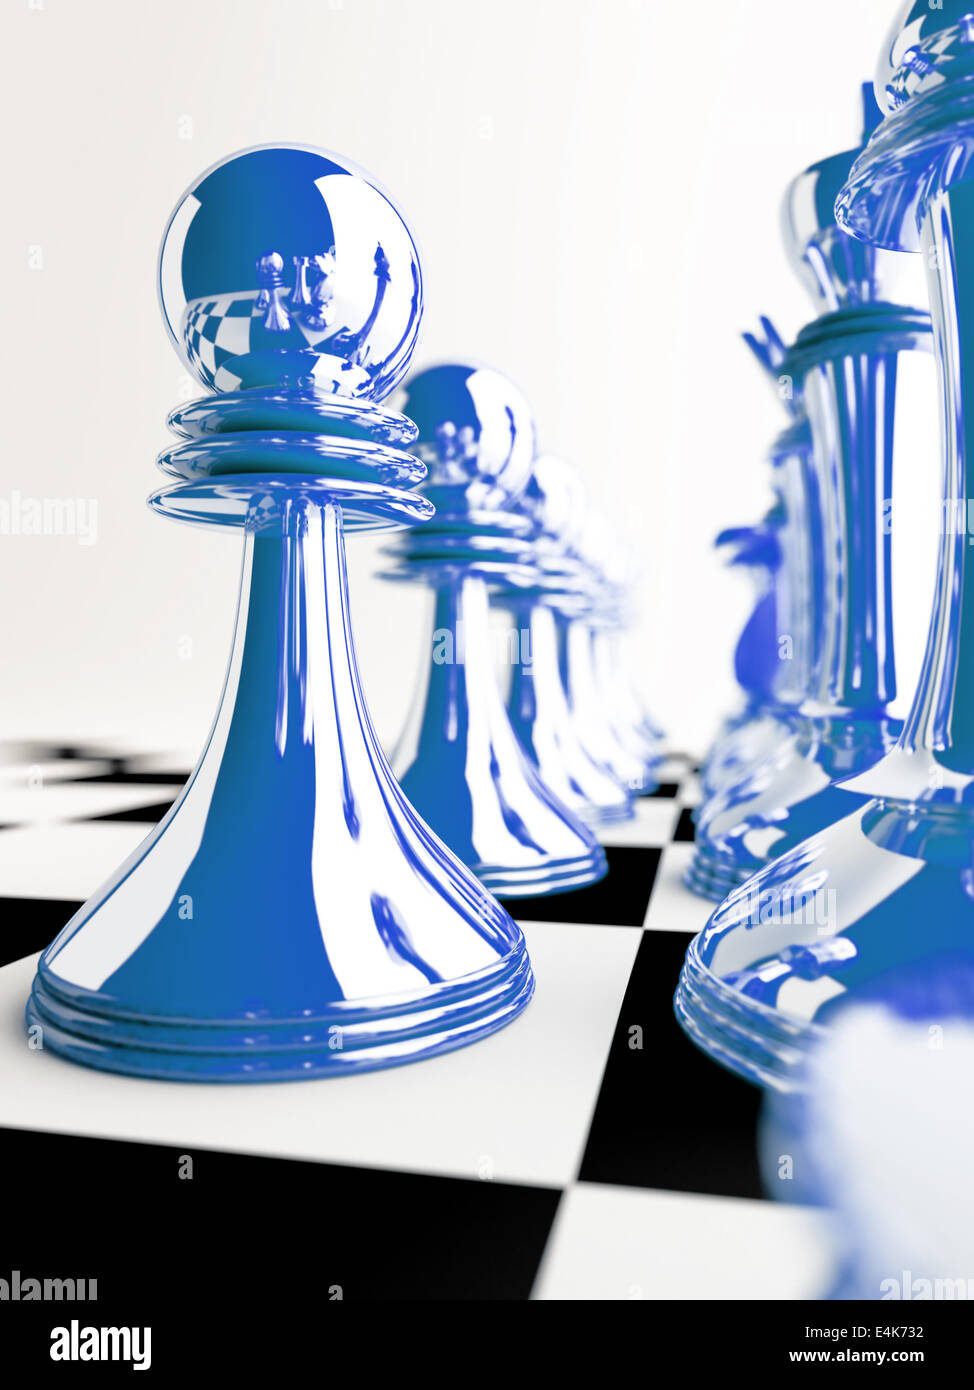 chessmen of blue color on checkered board Stock Photo